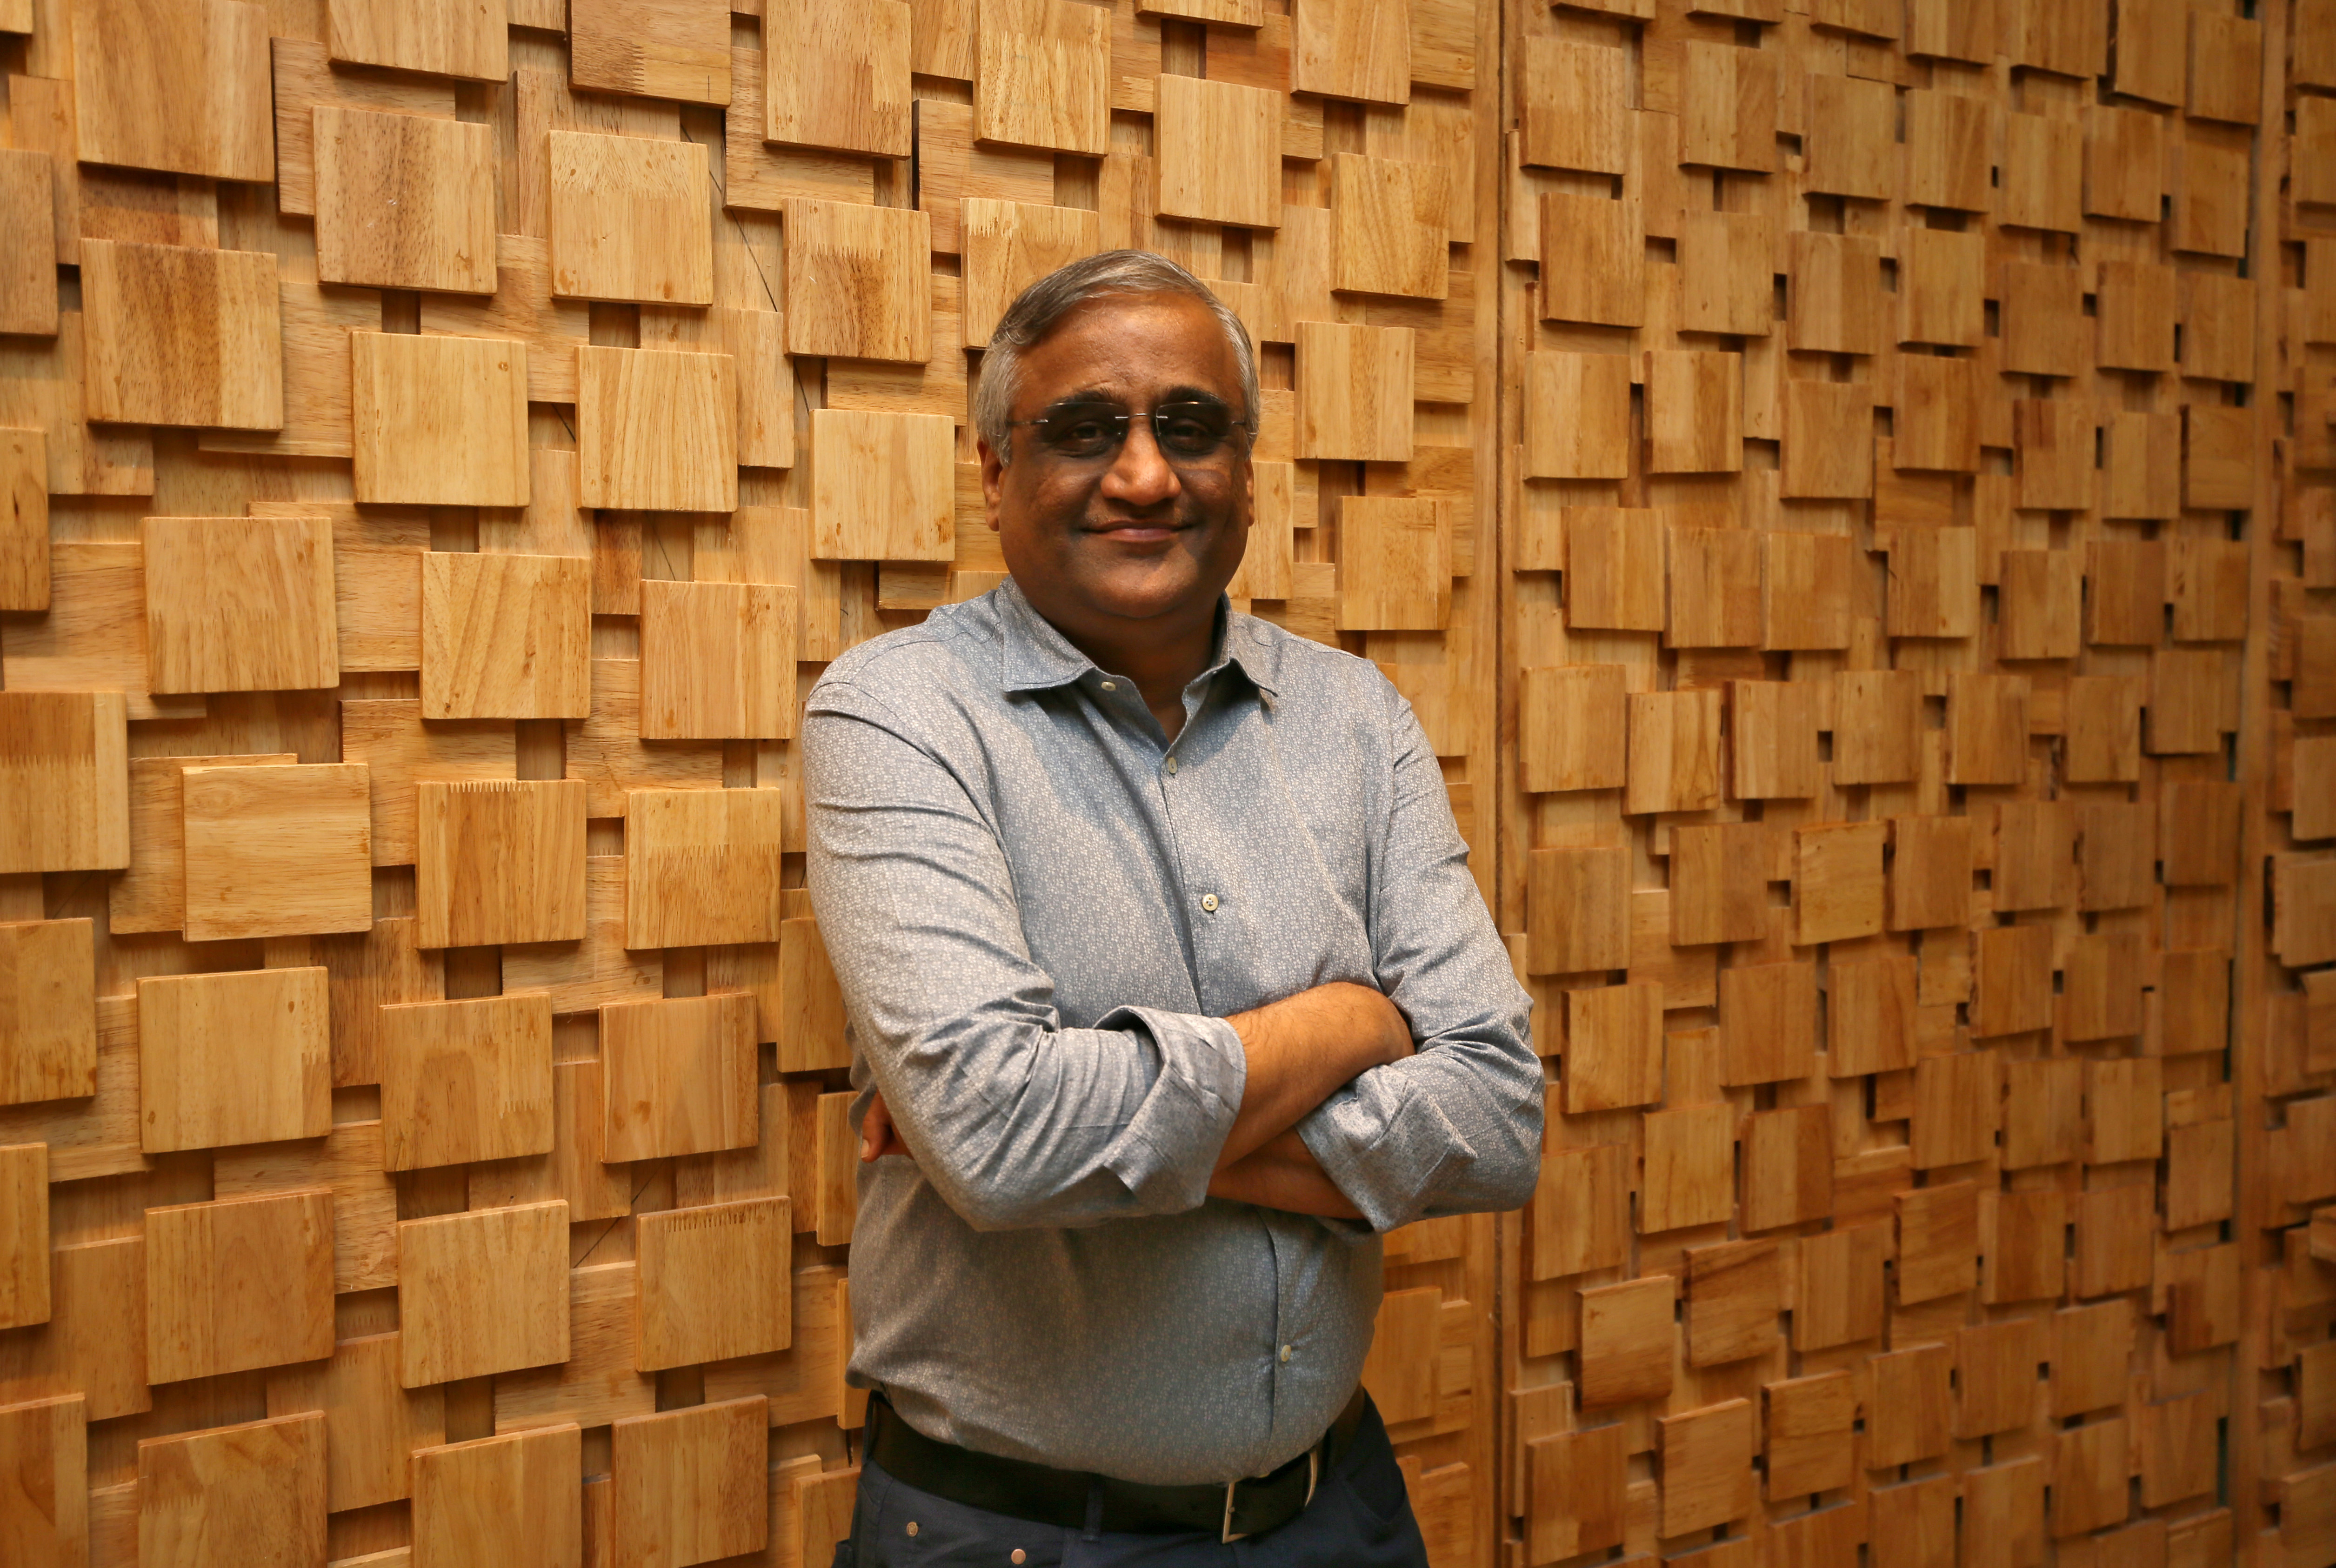 Kishore Biyani, CEO and founder of India's Future Group poses after the inauguration of Foodhall, a premium lifestyle food superstore by the Future Group, store in Mumbai, India, December 1, 2018. REUTERS/Francis Mascarenhas